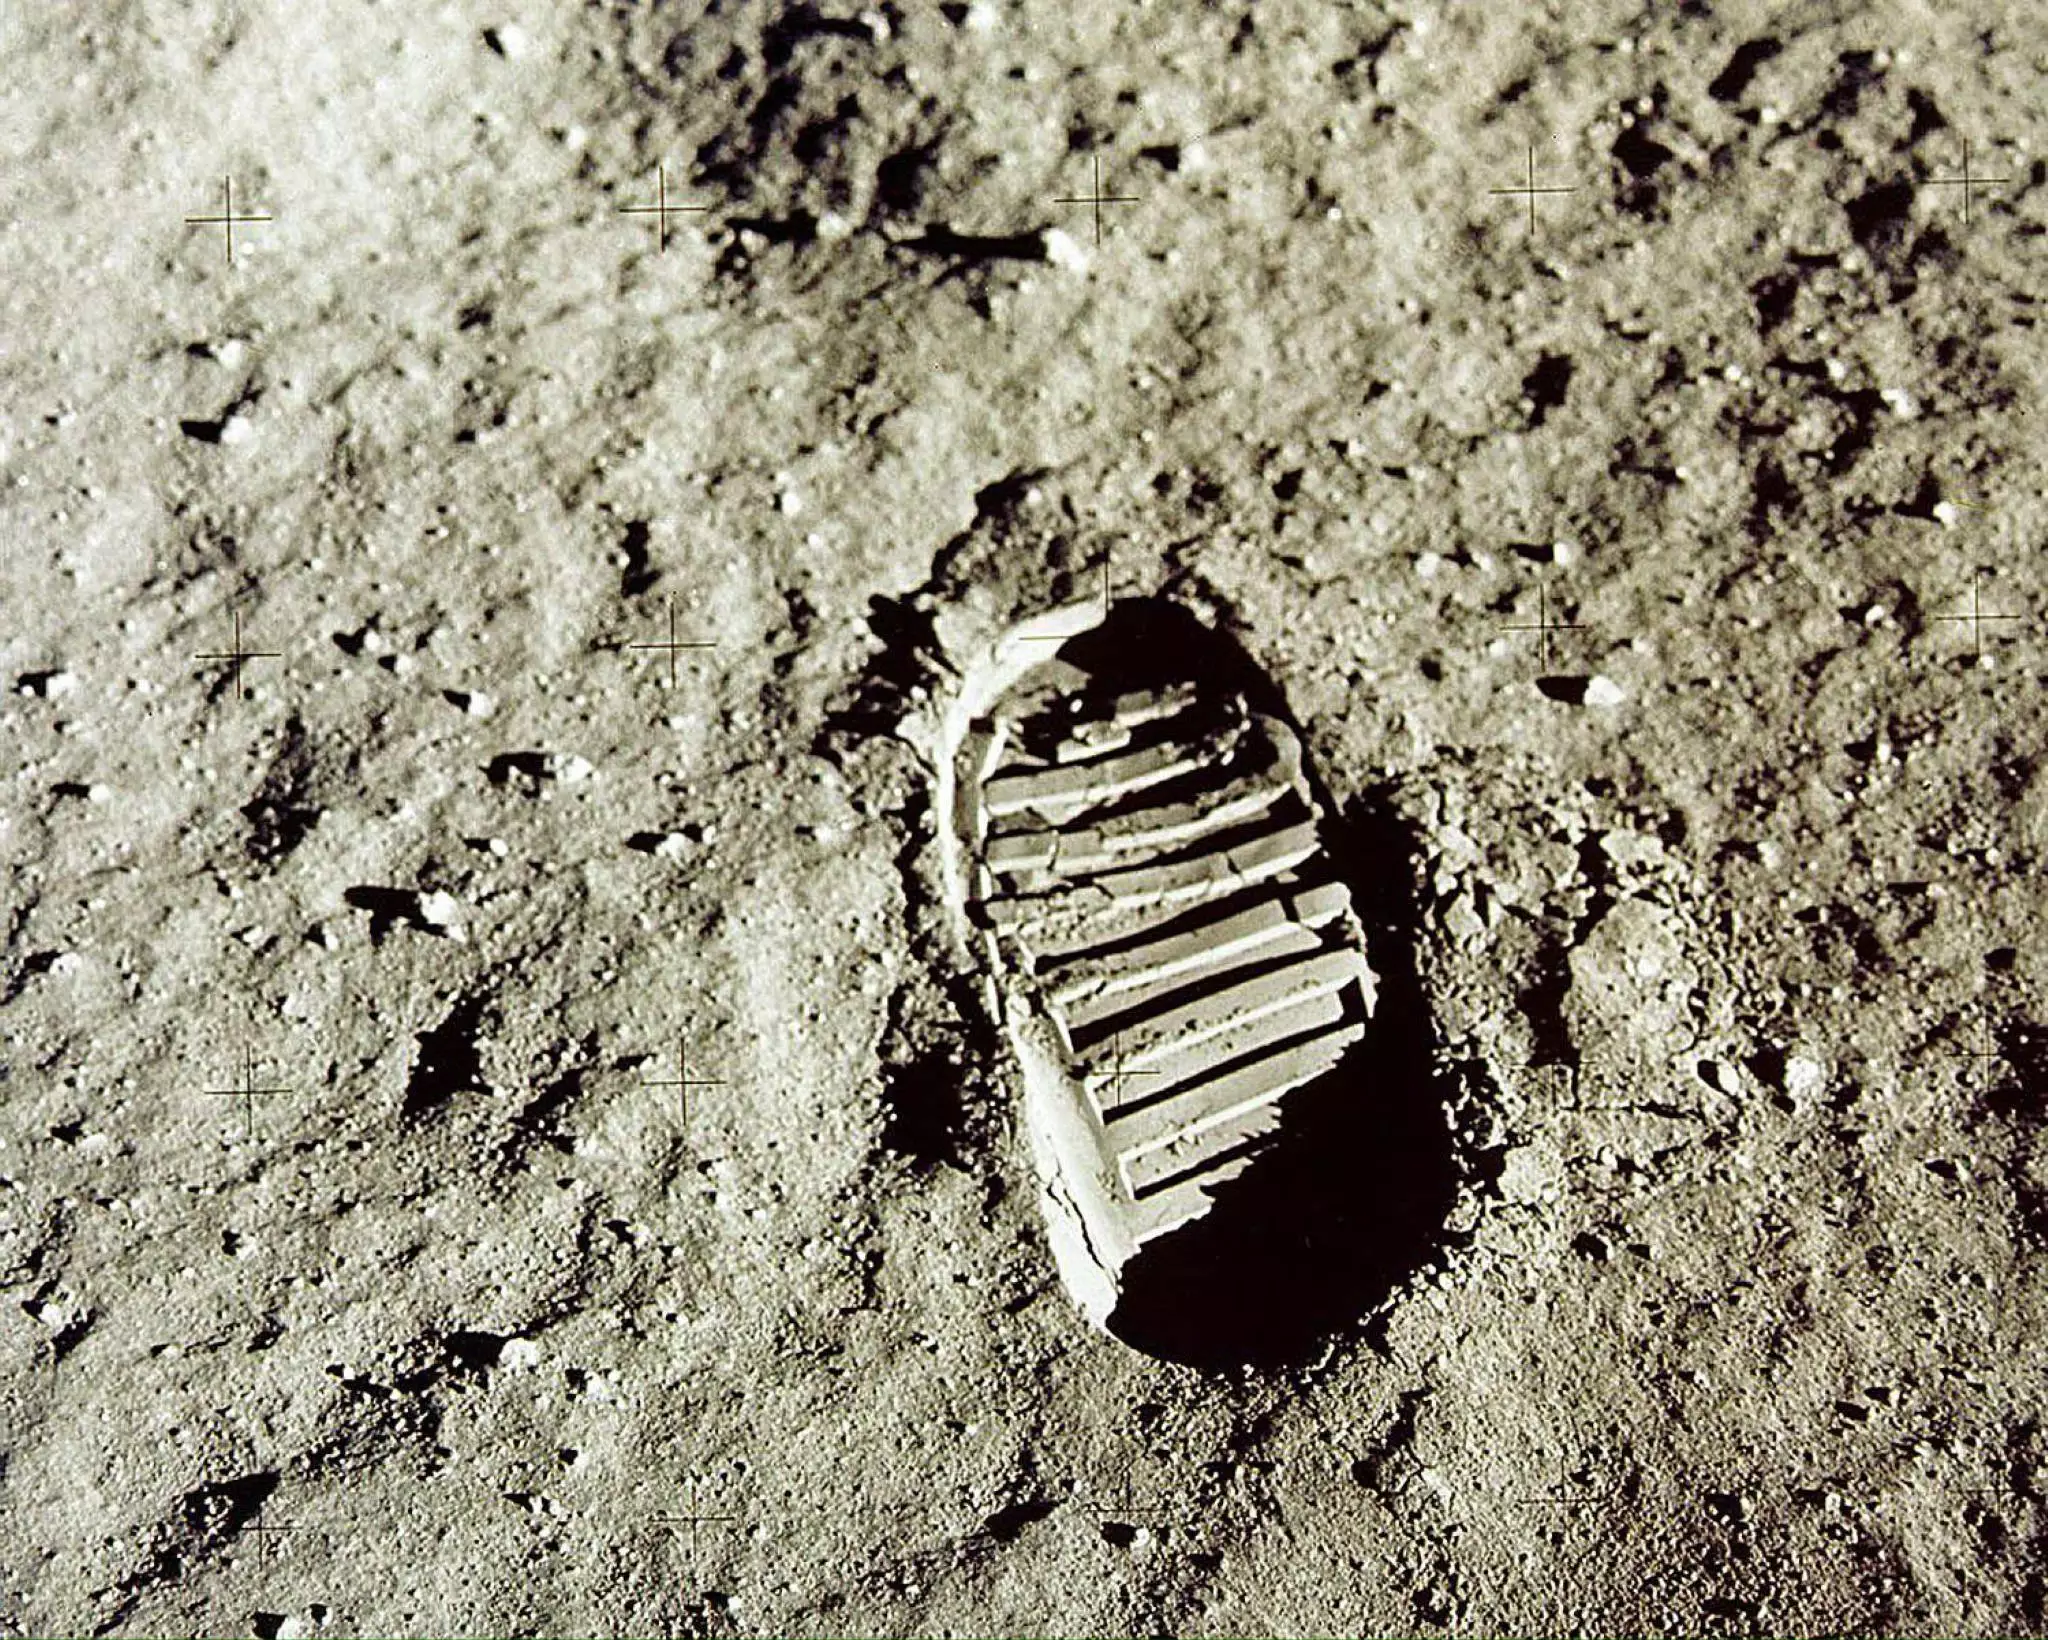 The first footstep on the moon, back in 1969 (